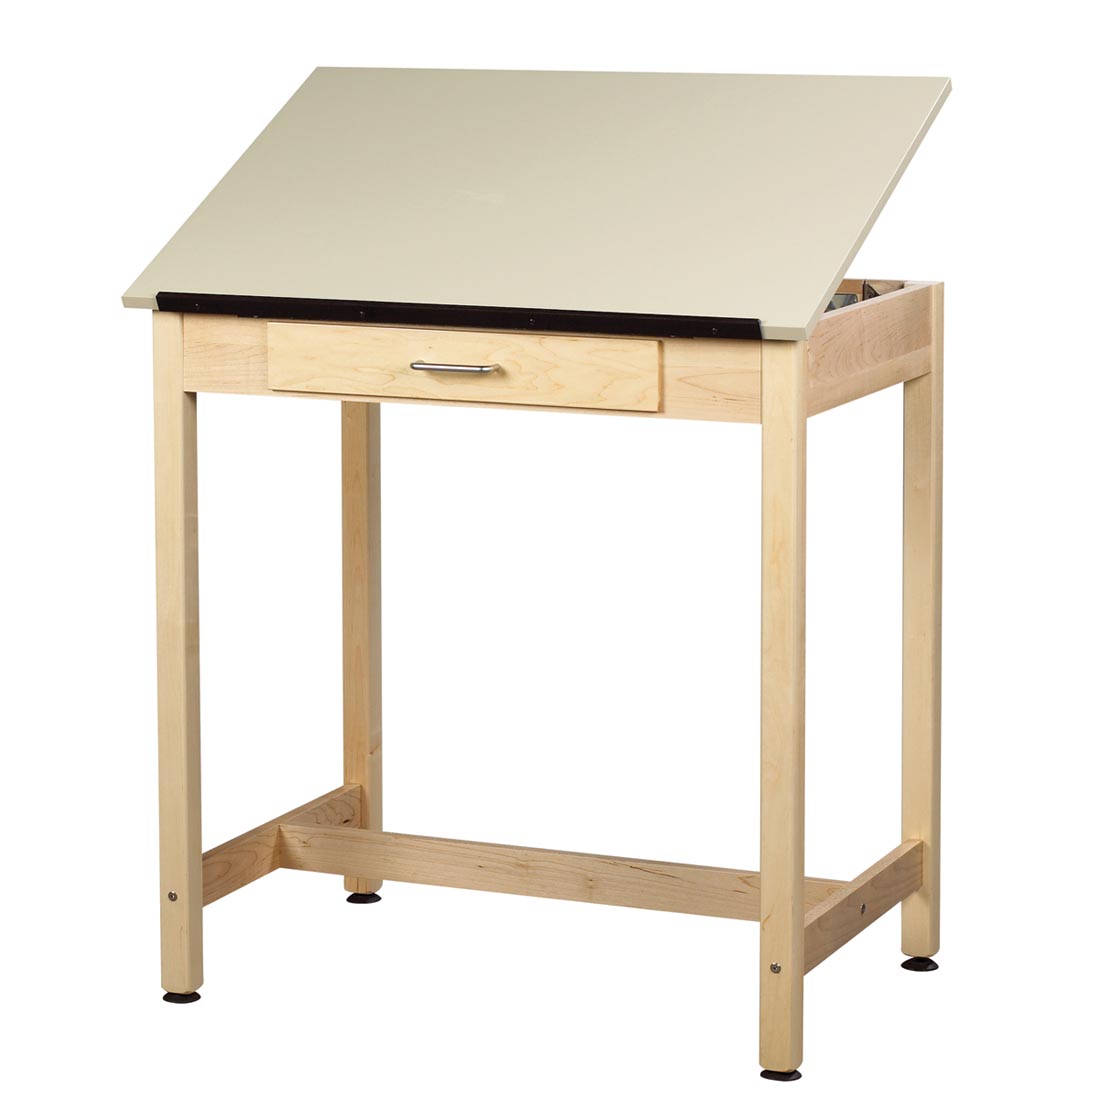 Art & Drafting Table with desk top in slanted position